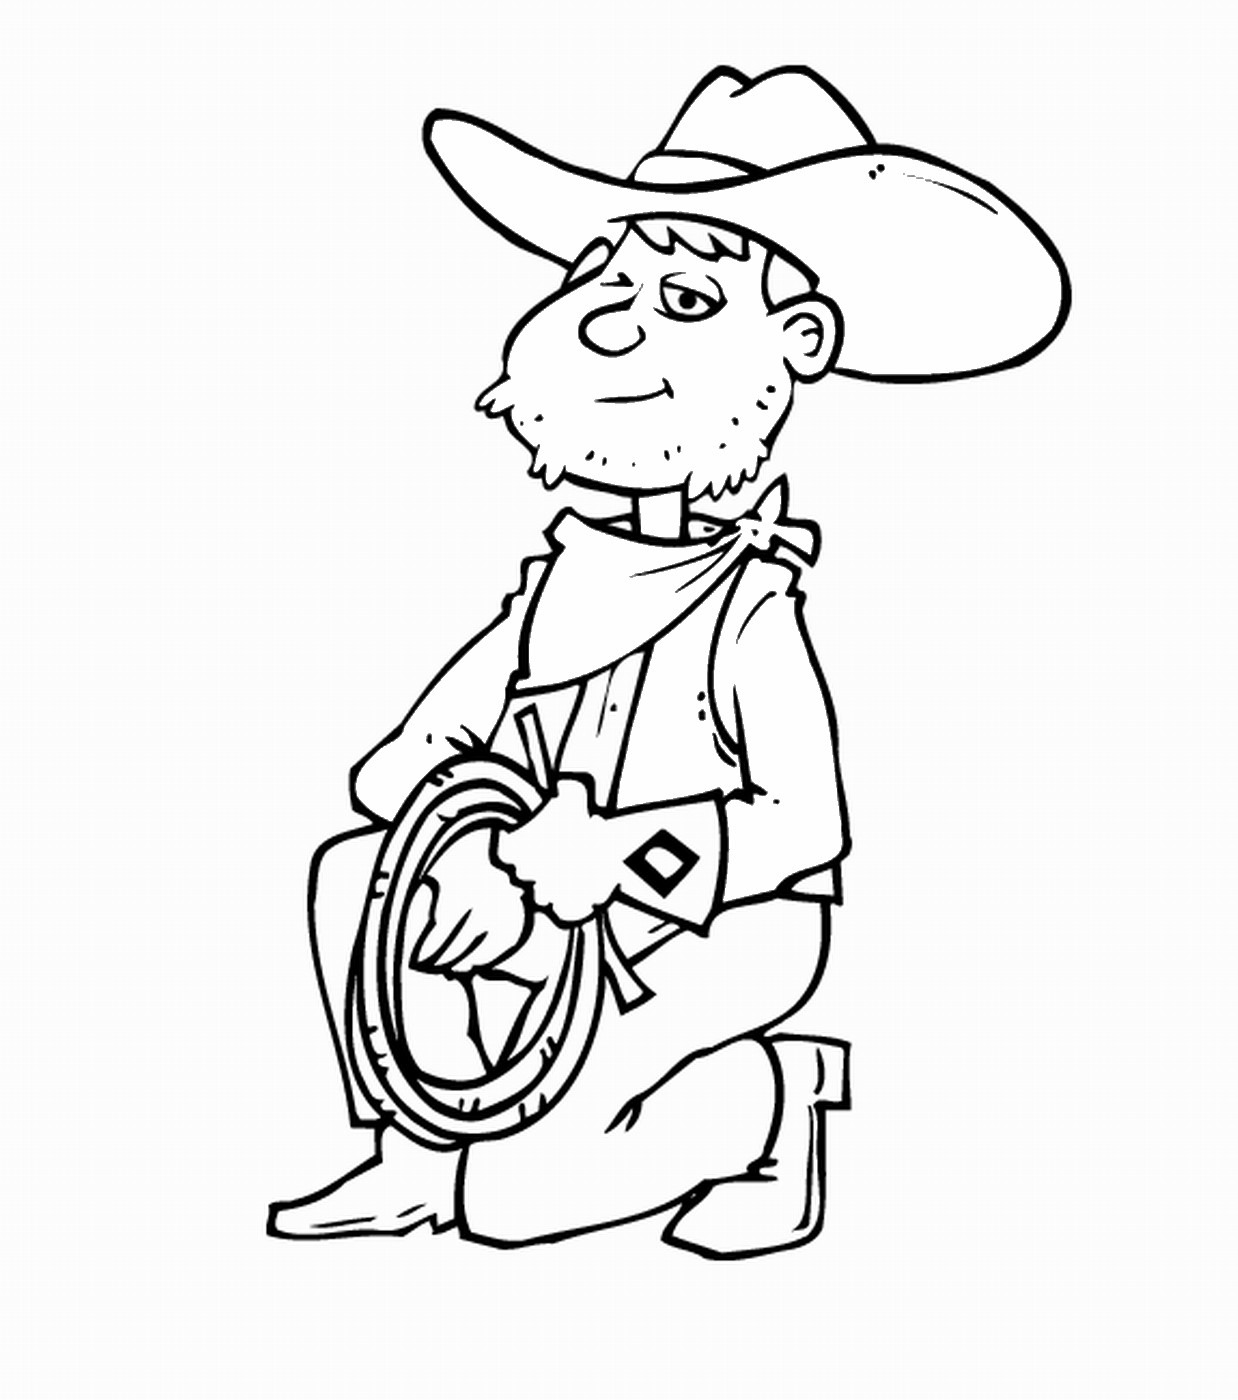 21 Of the Best Ideas for Printable Cowboy Coloring Pages – Home, Family ...